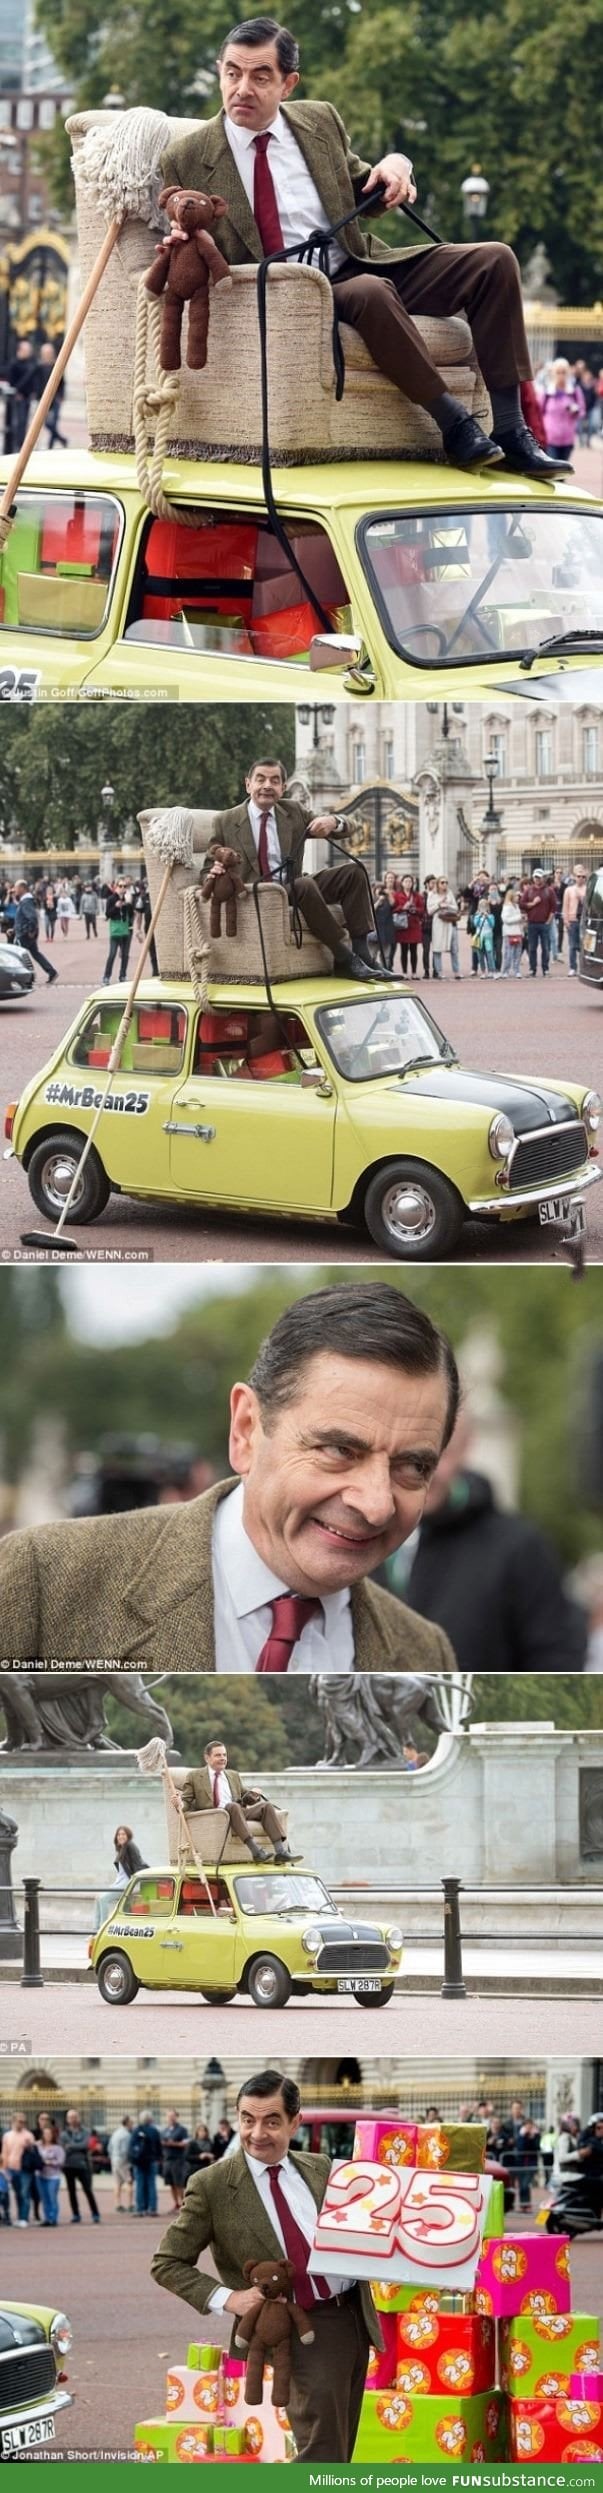 Mr. Bean returned to the streets in England